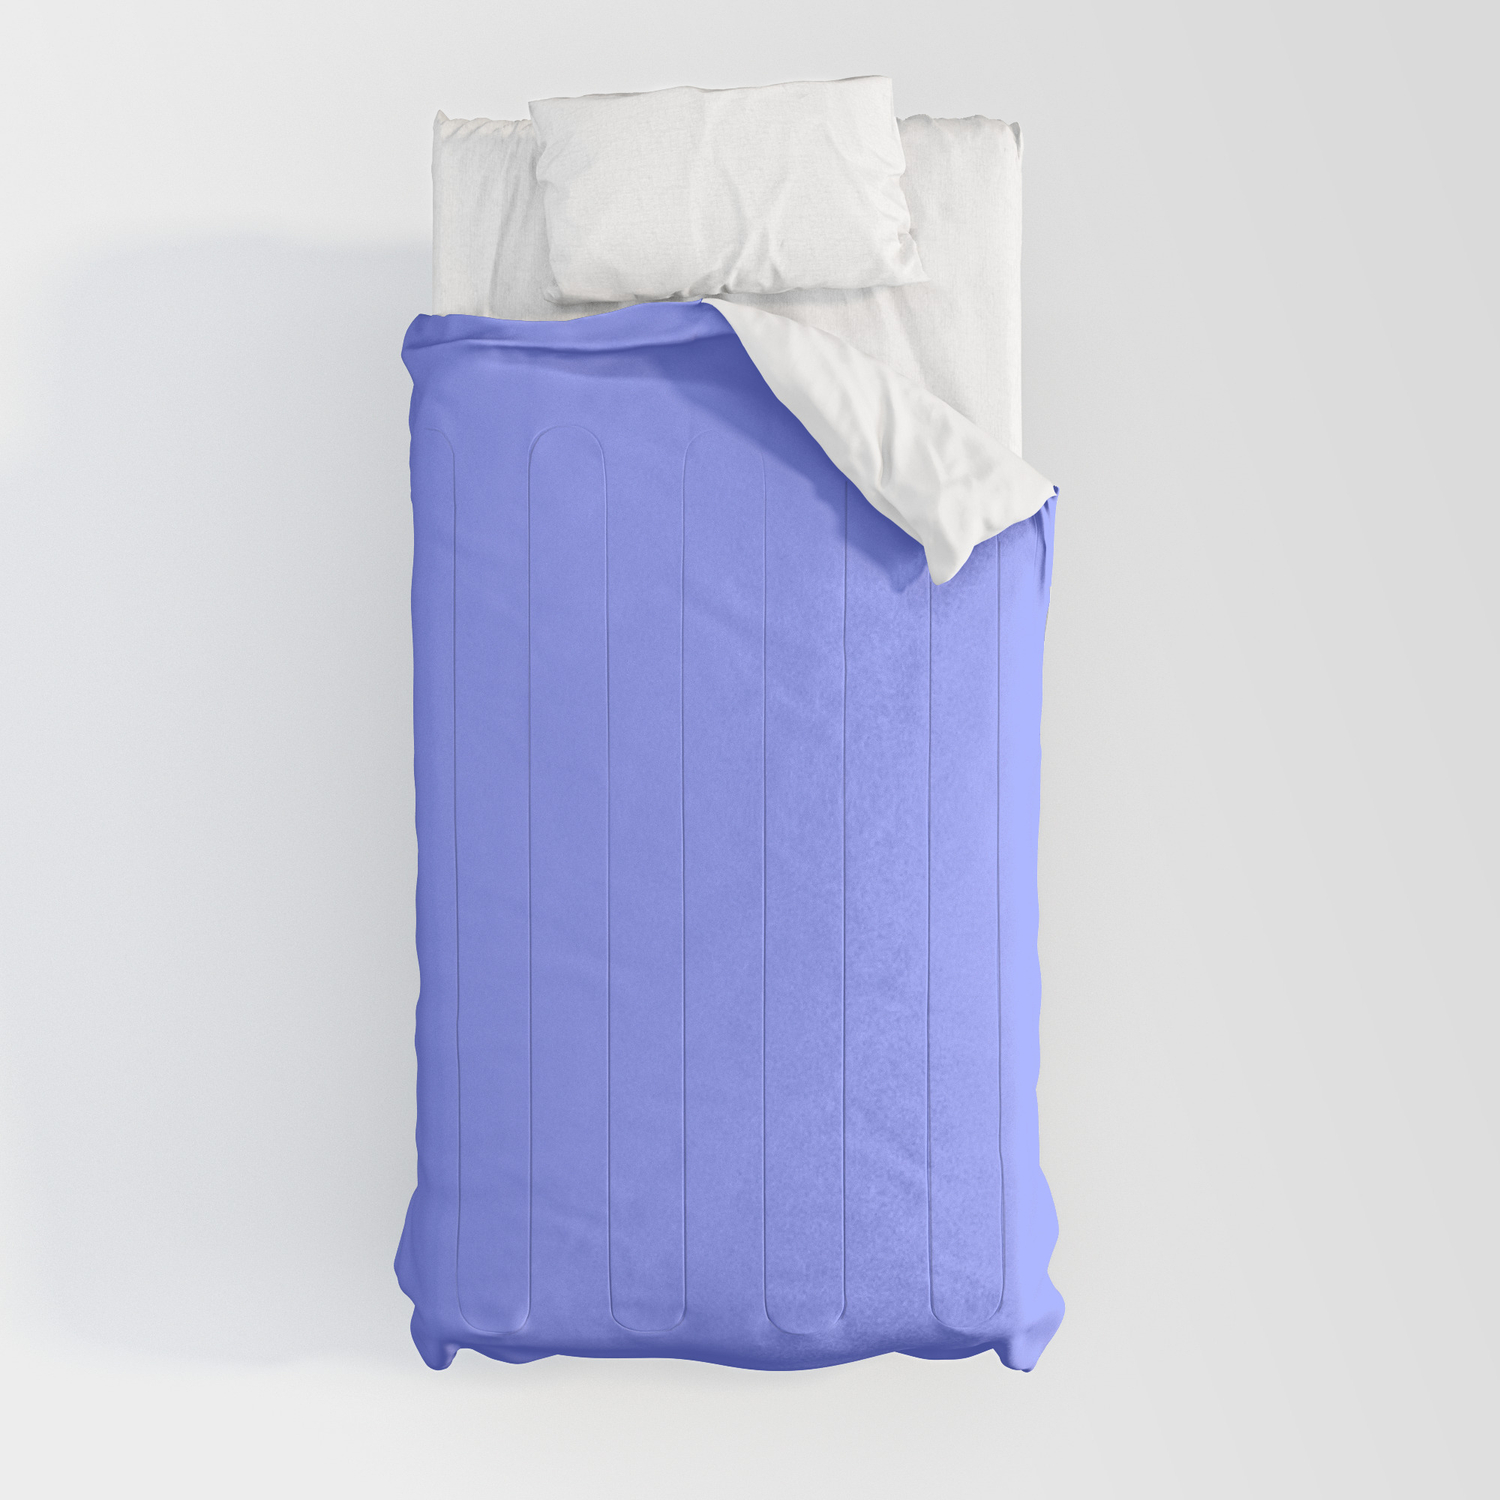 Periwinkle Blue Comforter By Simple, Periwinkle Twin Bedding